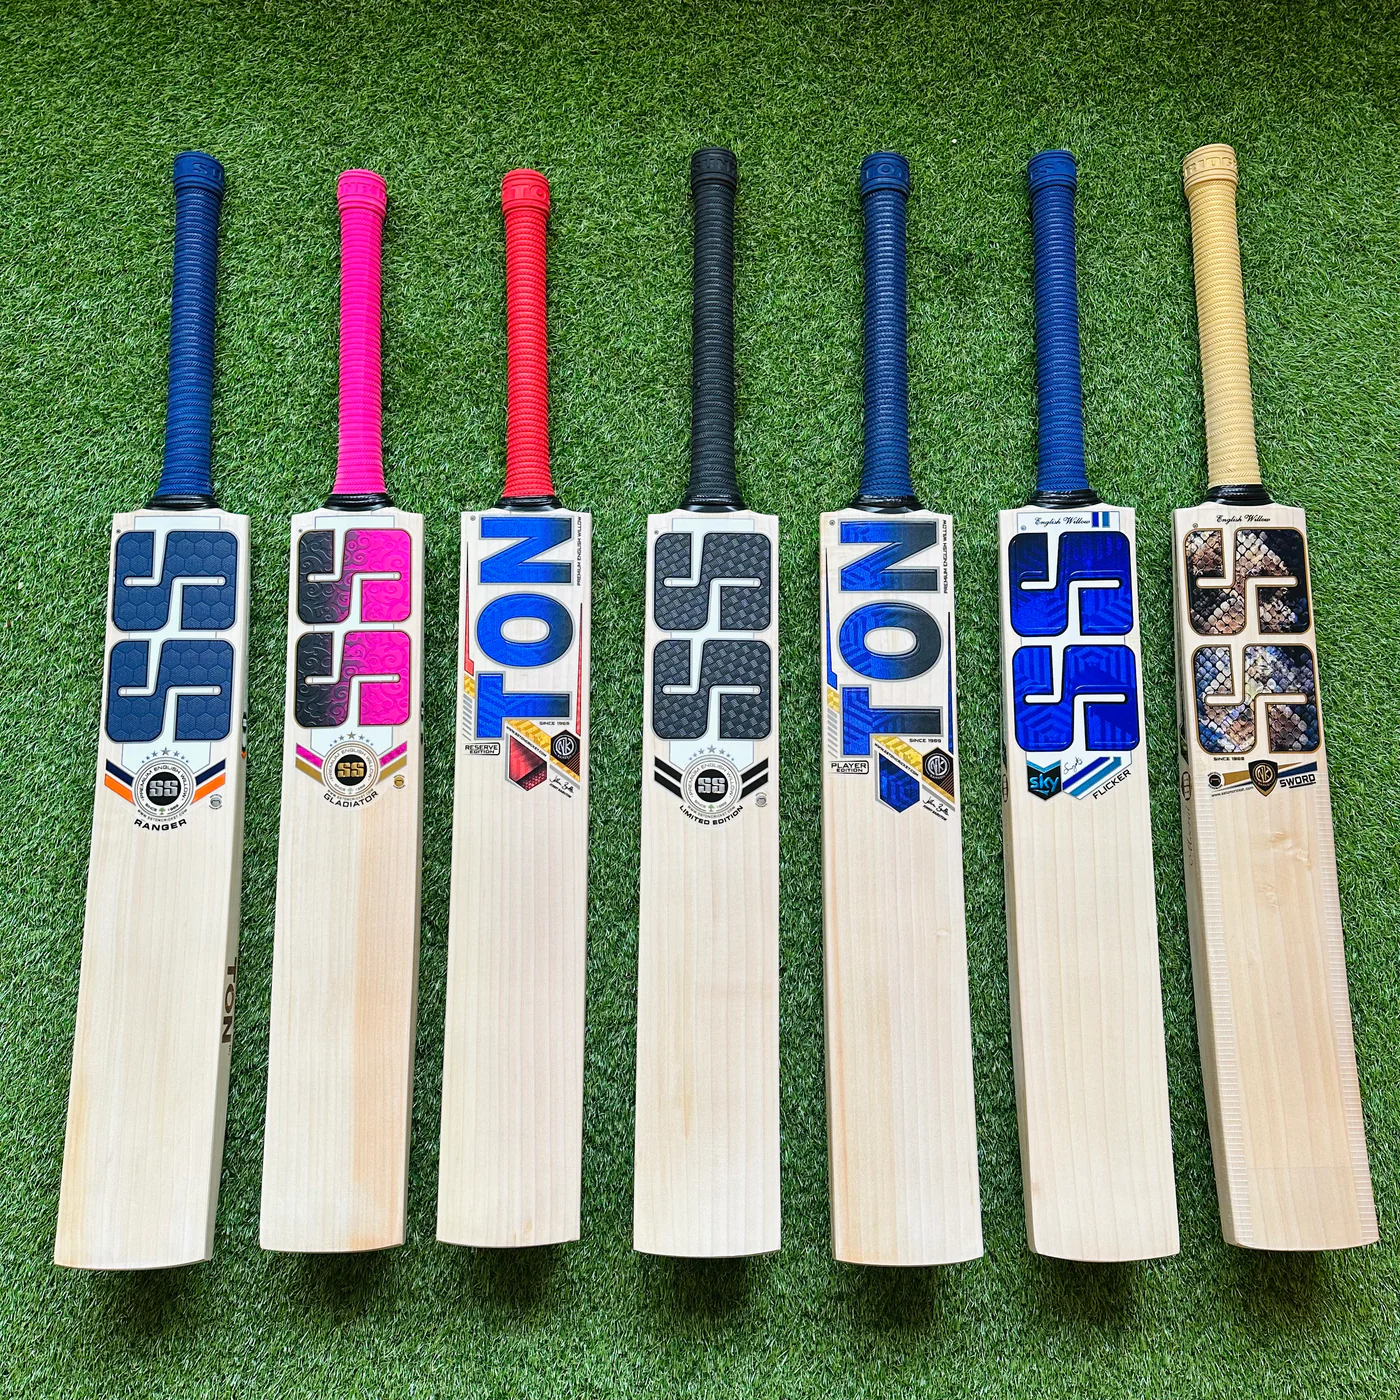 SS Cricket Bats – 5 Reasons Why They Boost Your Game